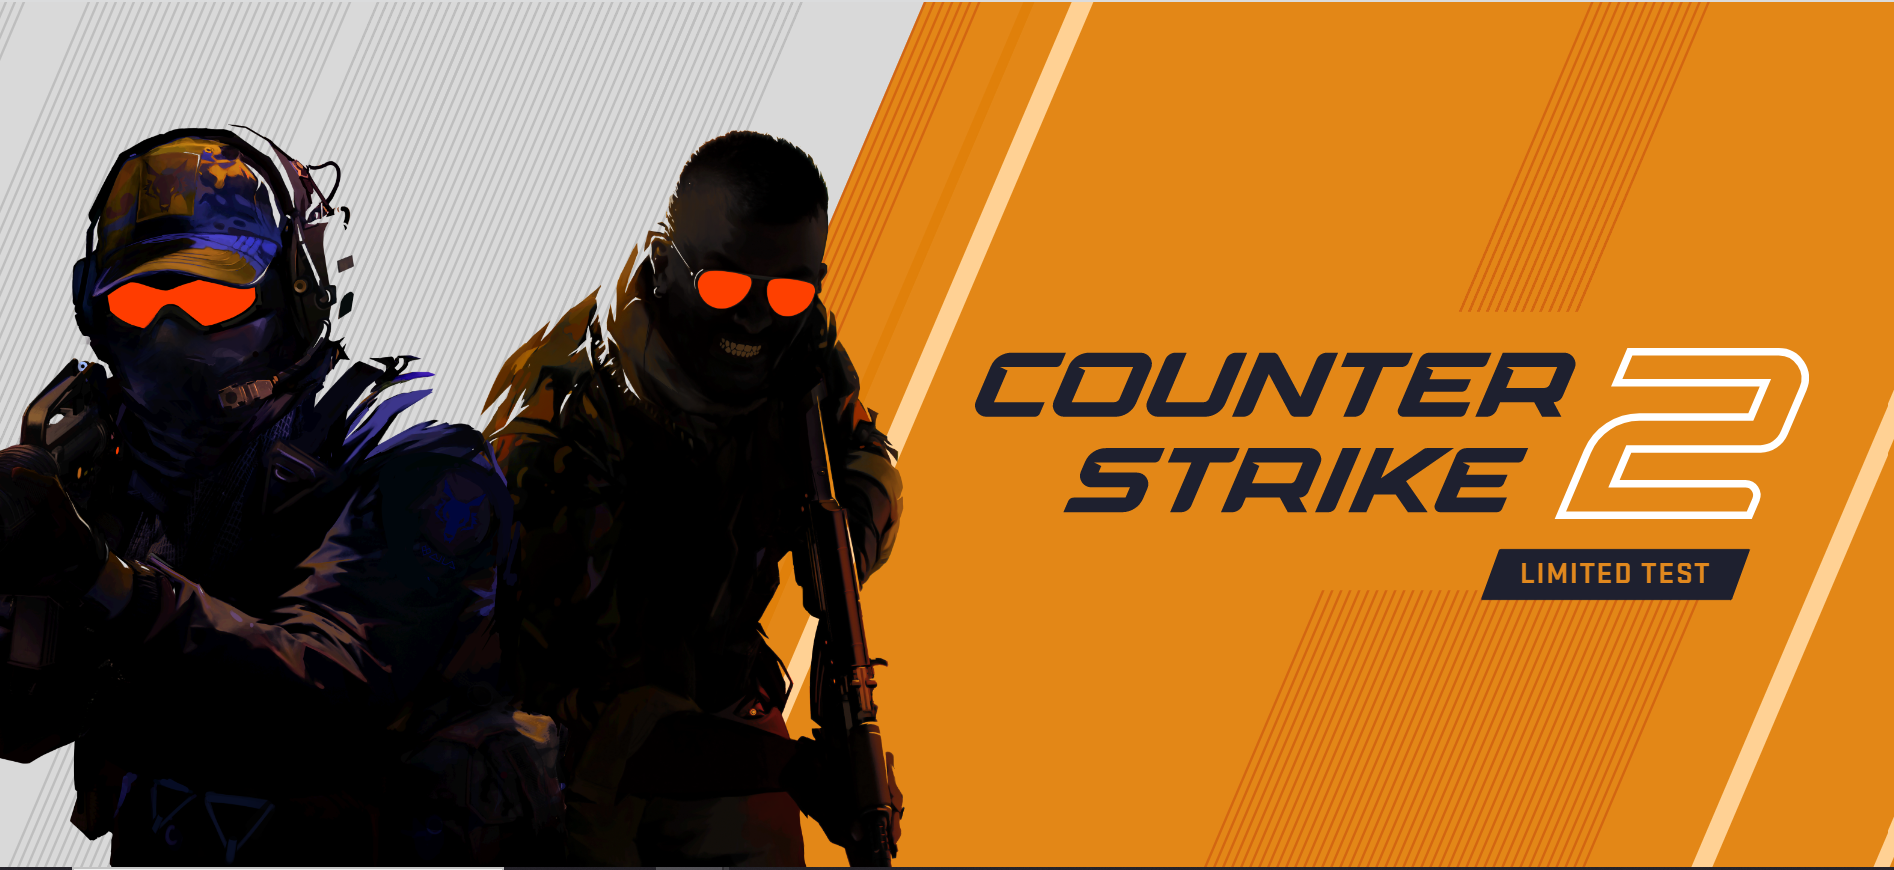 Download Counter Strike Global Offensive Logo Vector EPS, SVG, PDF, Ai,  CDR, and PNG Free, size 282.99 KB